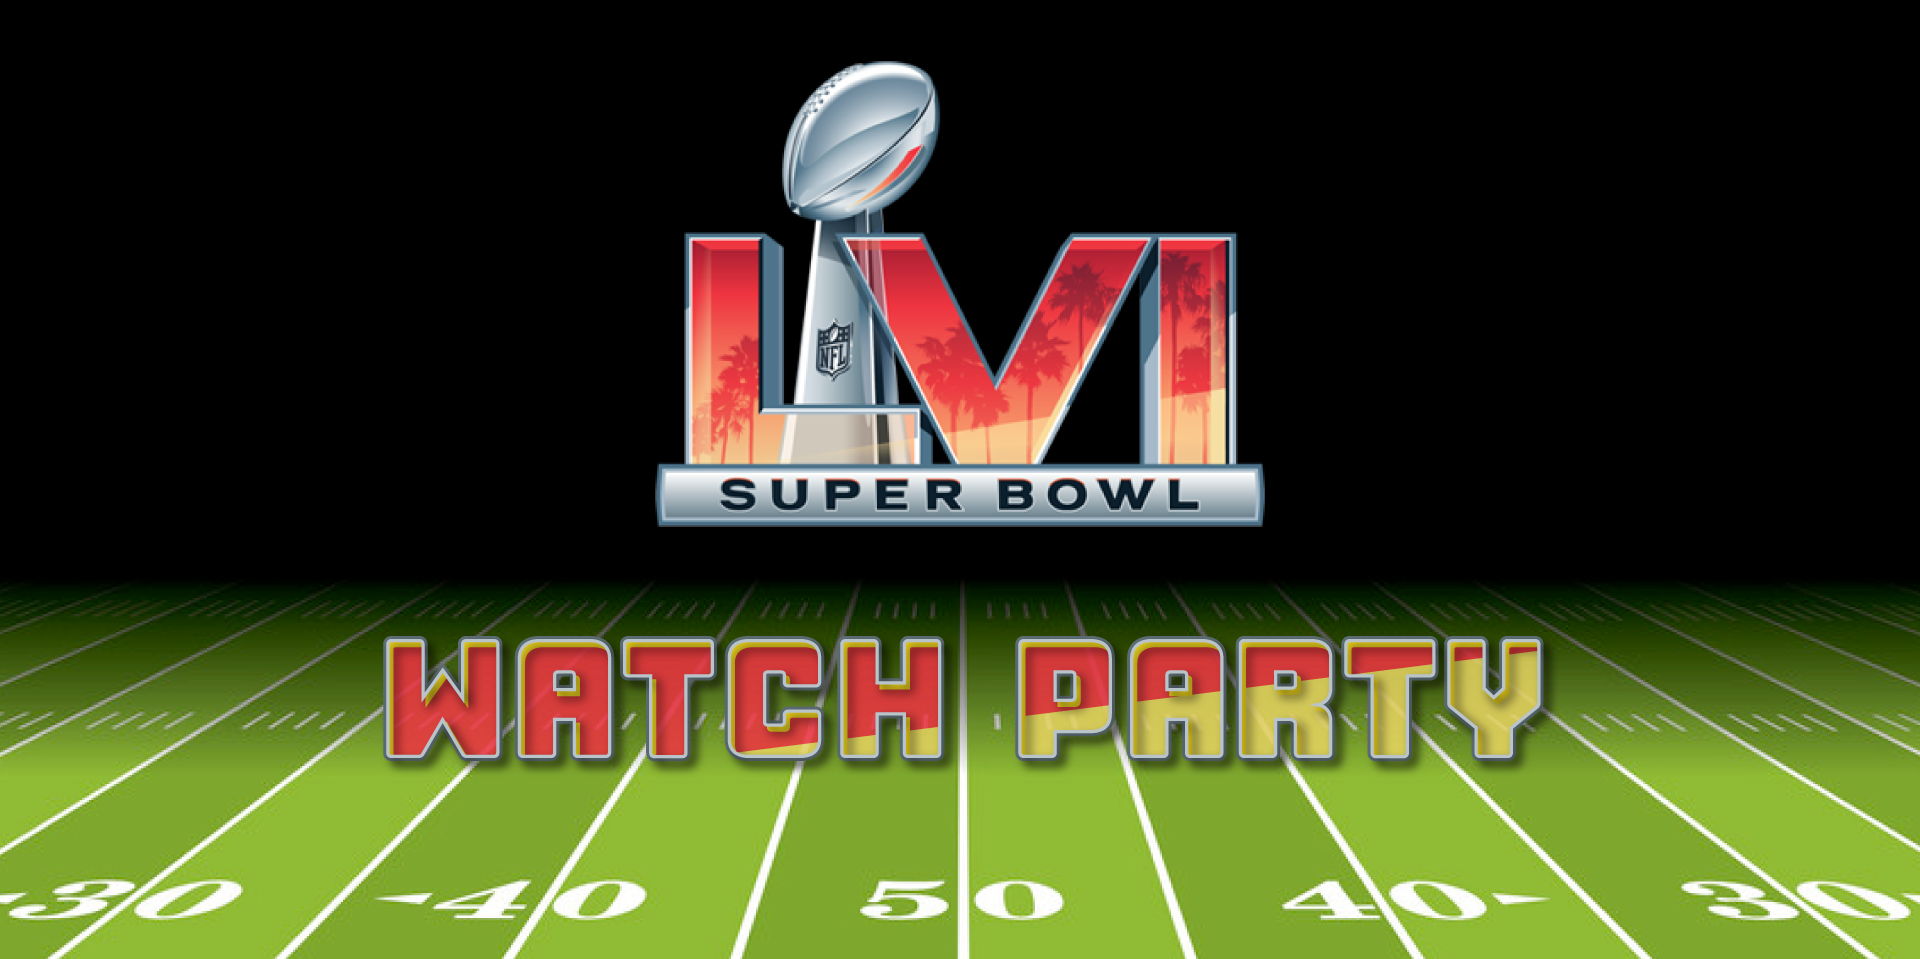 Super Bowl Watch Party promotional image